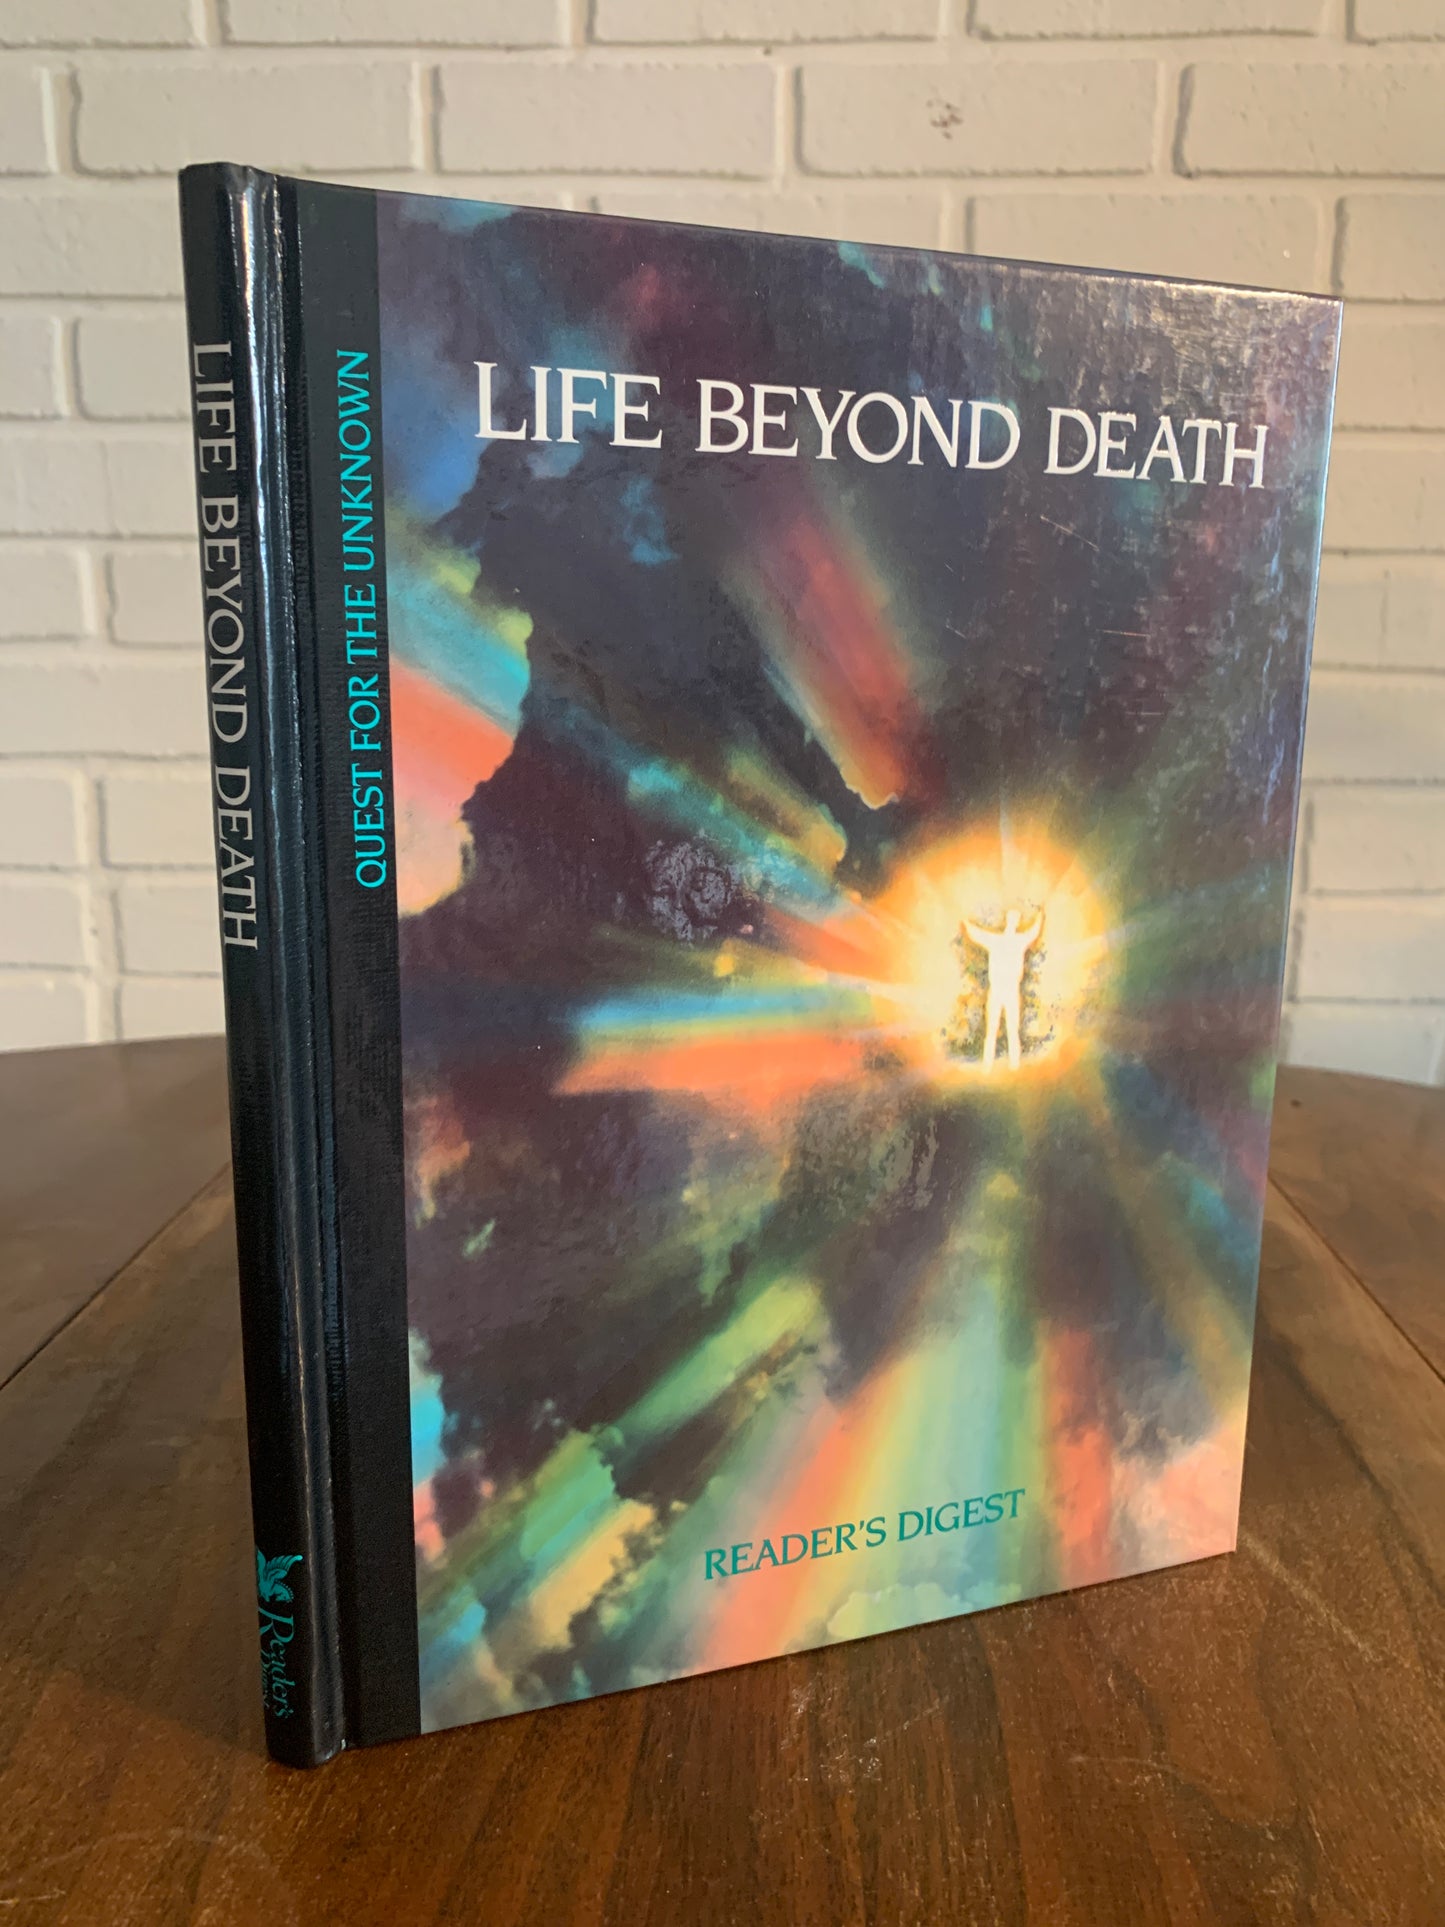 Life Beyond Death: Quest for the Unknown by Reader's Digest 1992